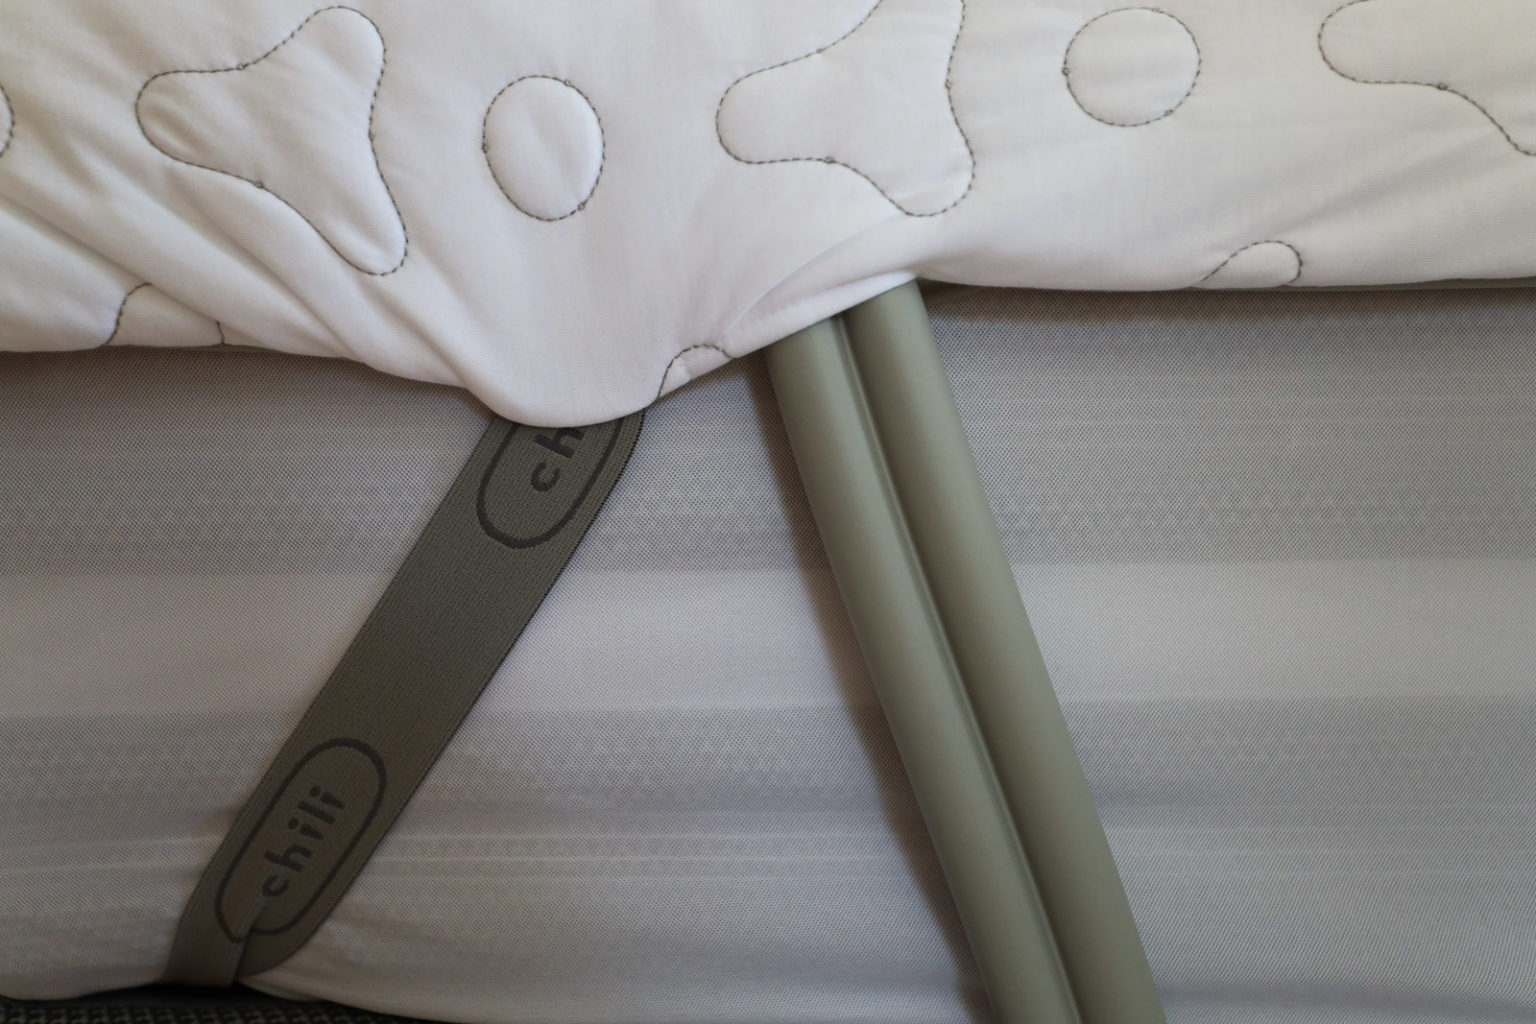 chili ooler review - chiliPAD OOLER Review - Controlled Cooling Mattress Pad